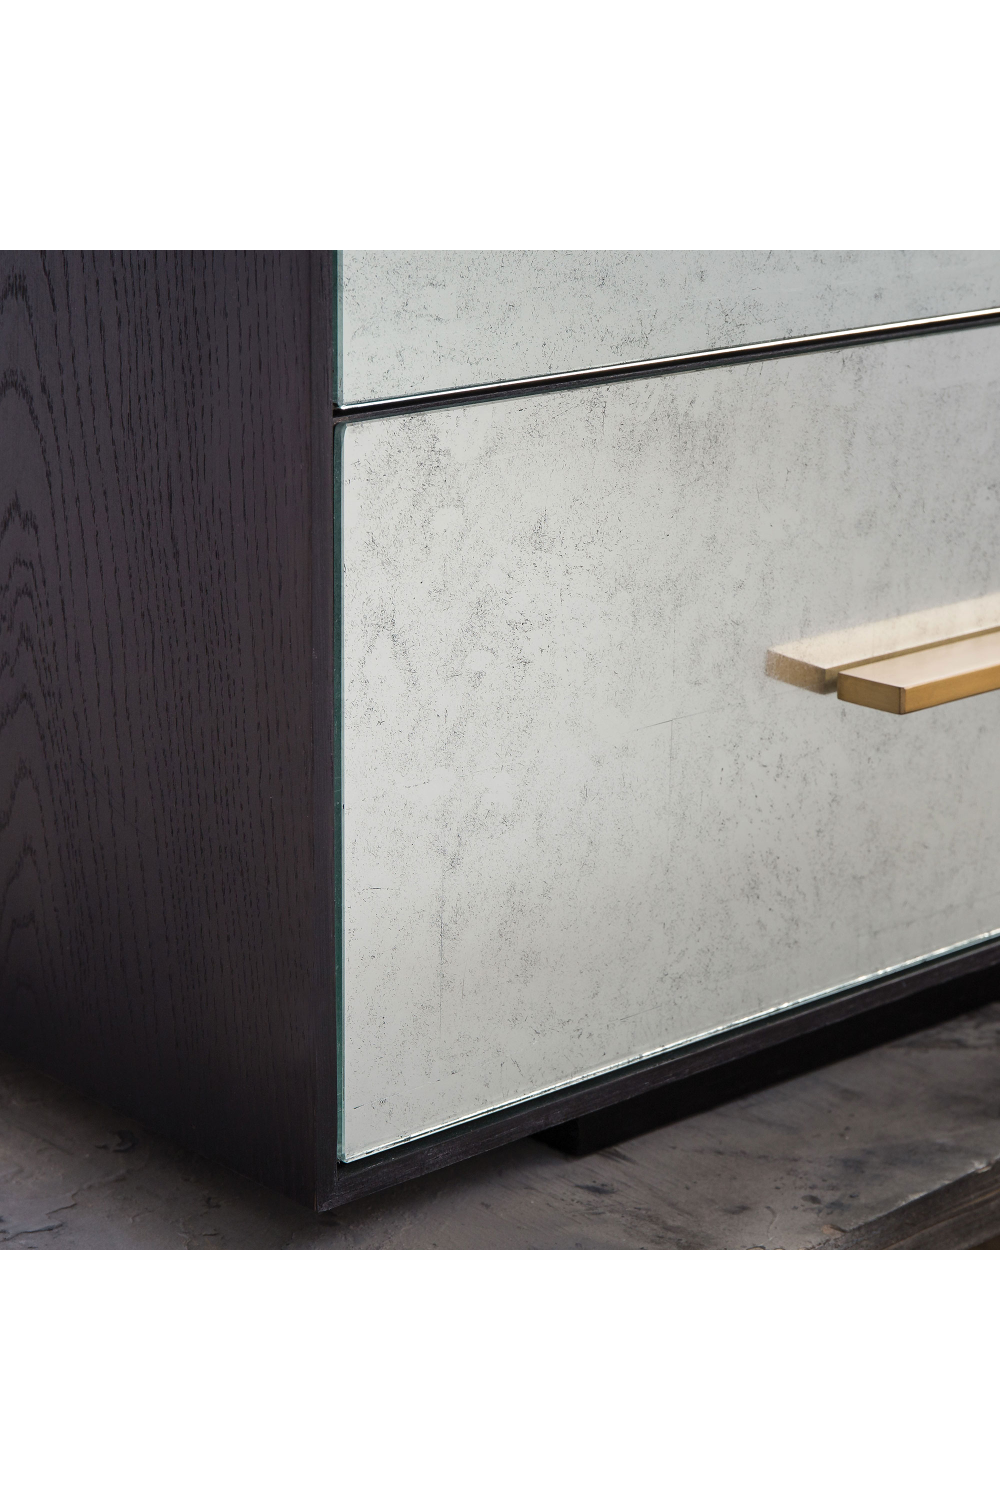 Plinth Base Oak Chest of Drawers - T | Andrew Martin Waters | Oroa.com